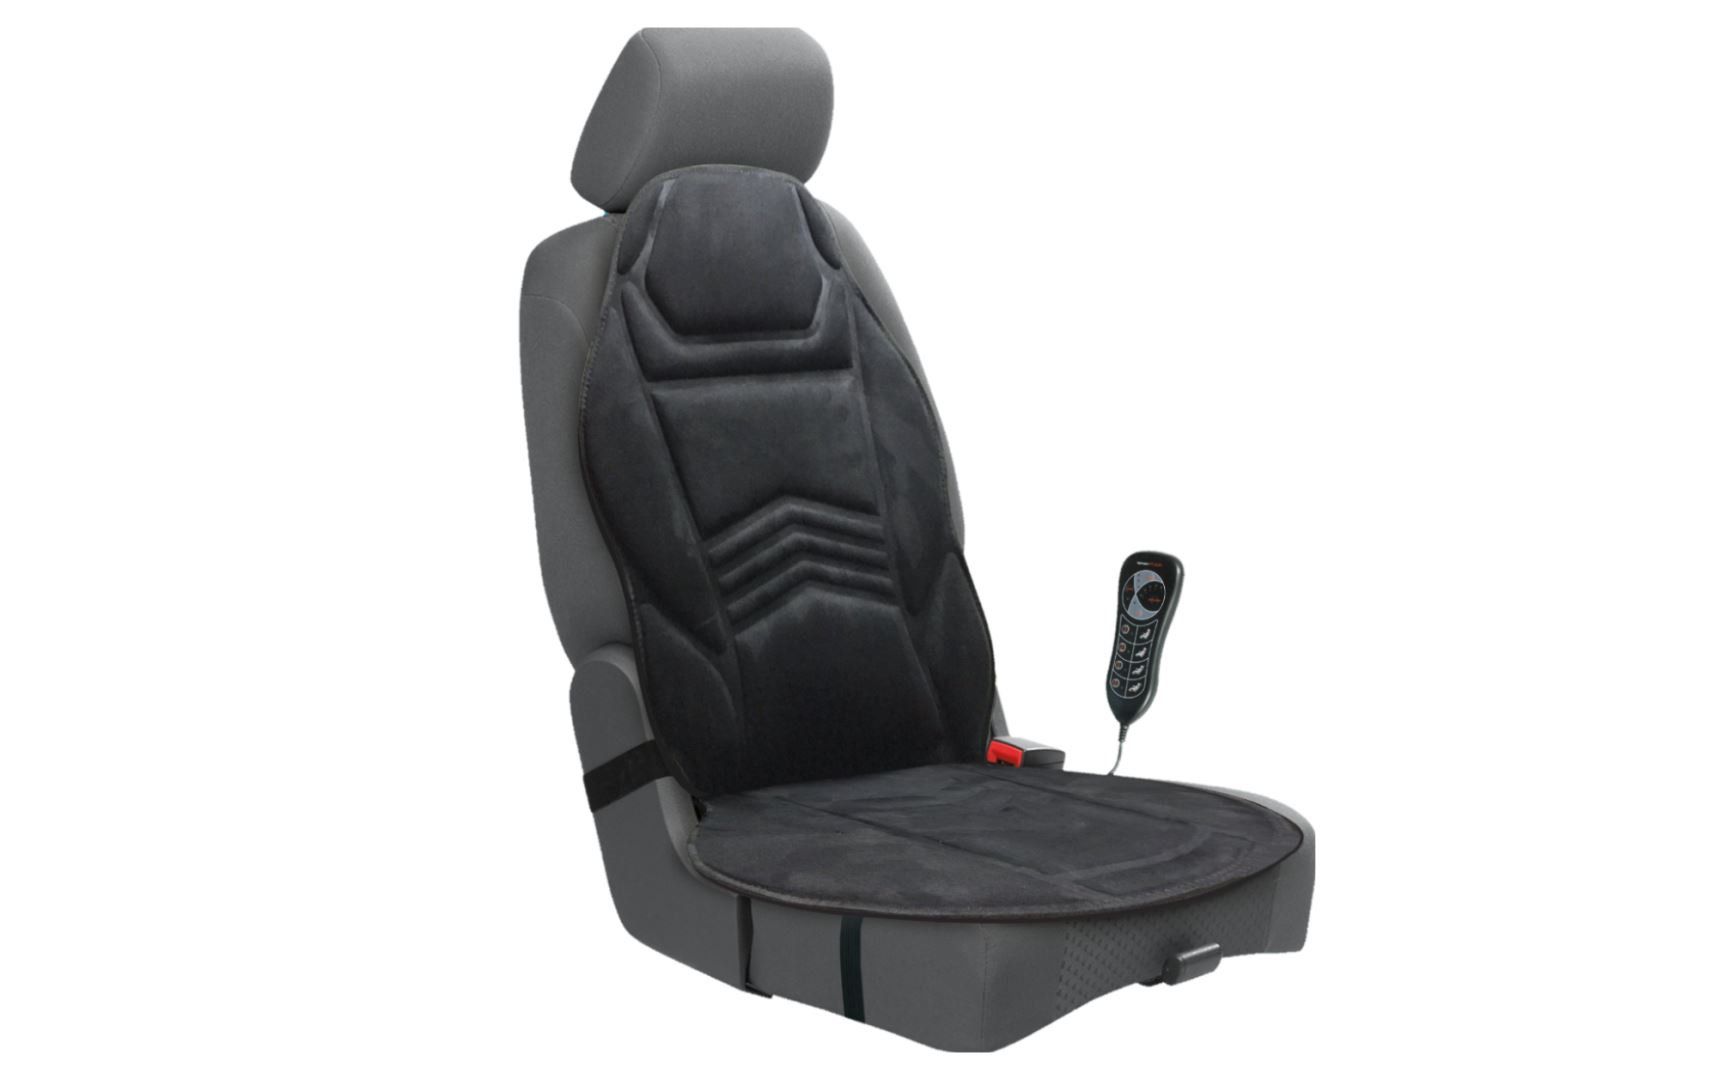 Halfords Lumbar Support Car Seat Cover